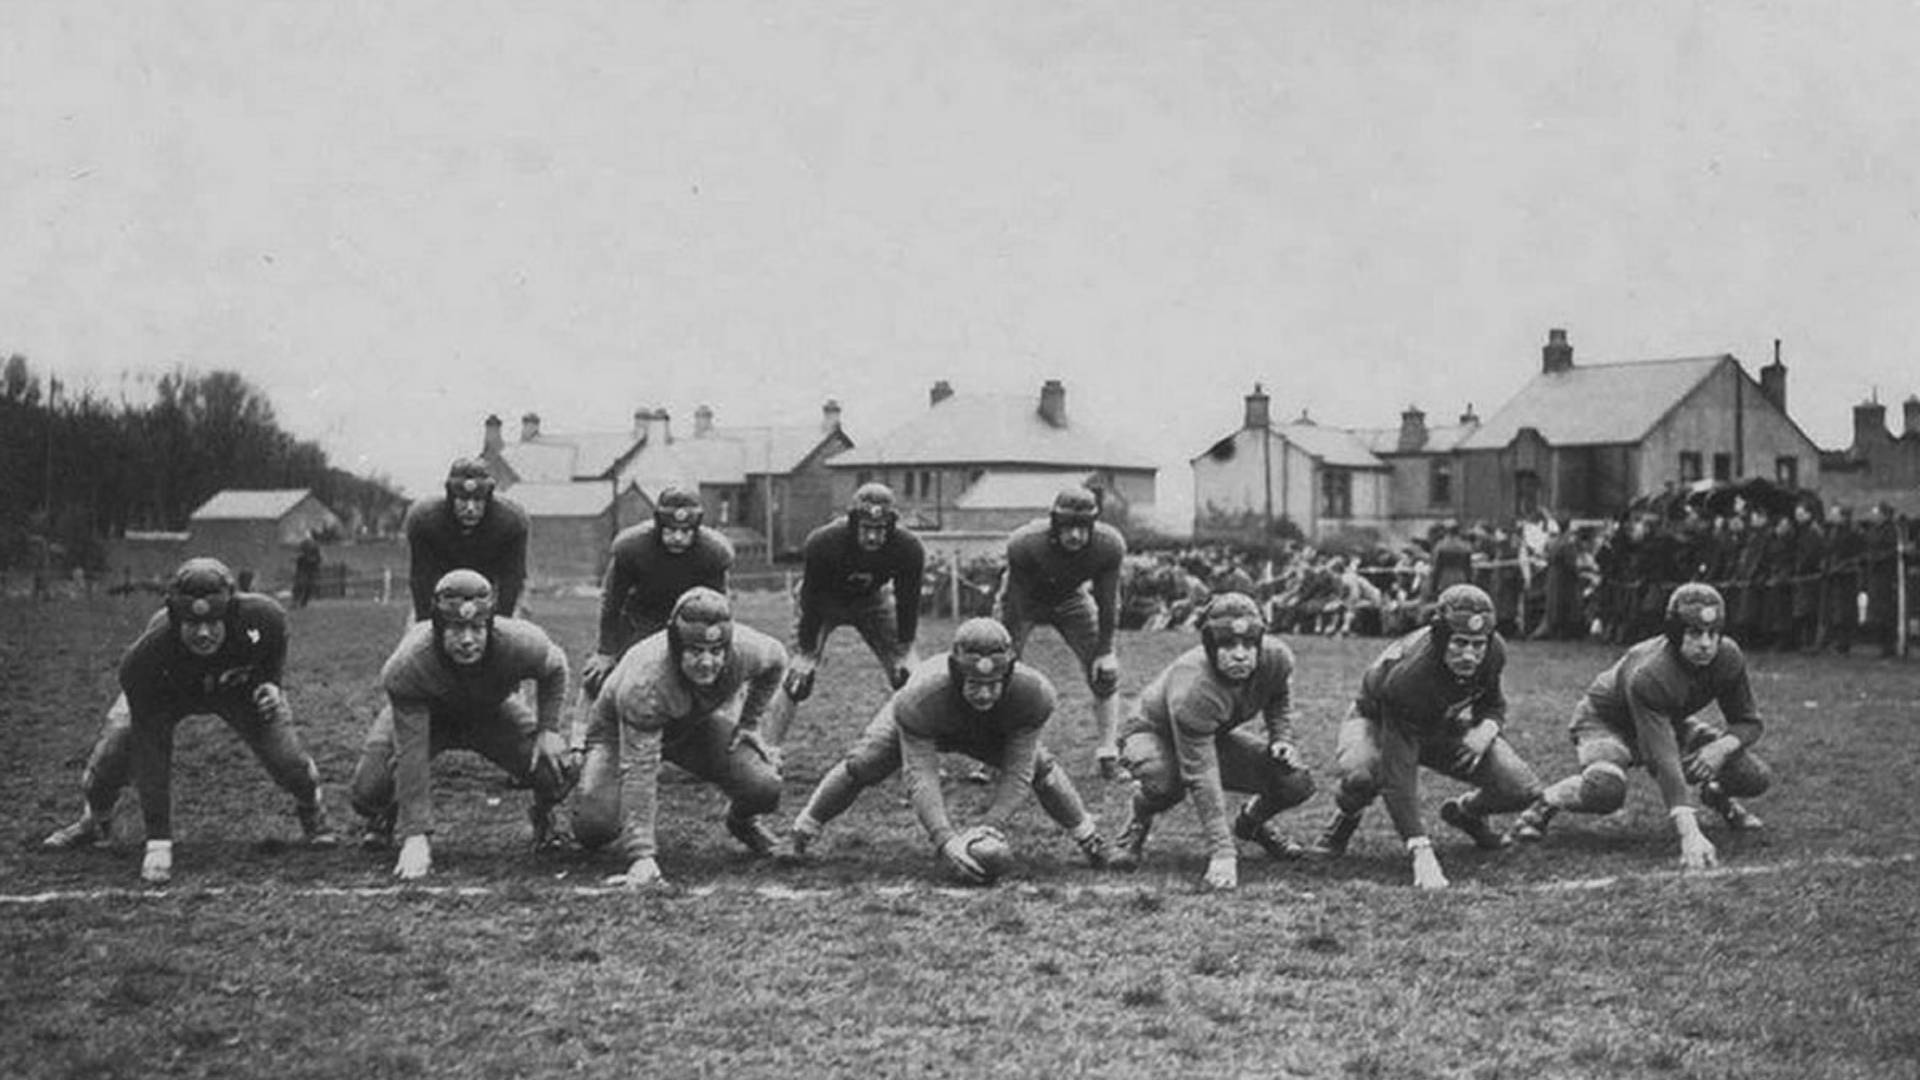 A United States military team named 'Yarvard' prepares for the first game of American Football played in the European Theater of Operations during the Second World War. 'Yarvard' trained at Sandy Bay playing fields in Larne, Co. Antrim in 1942.